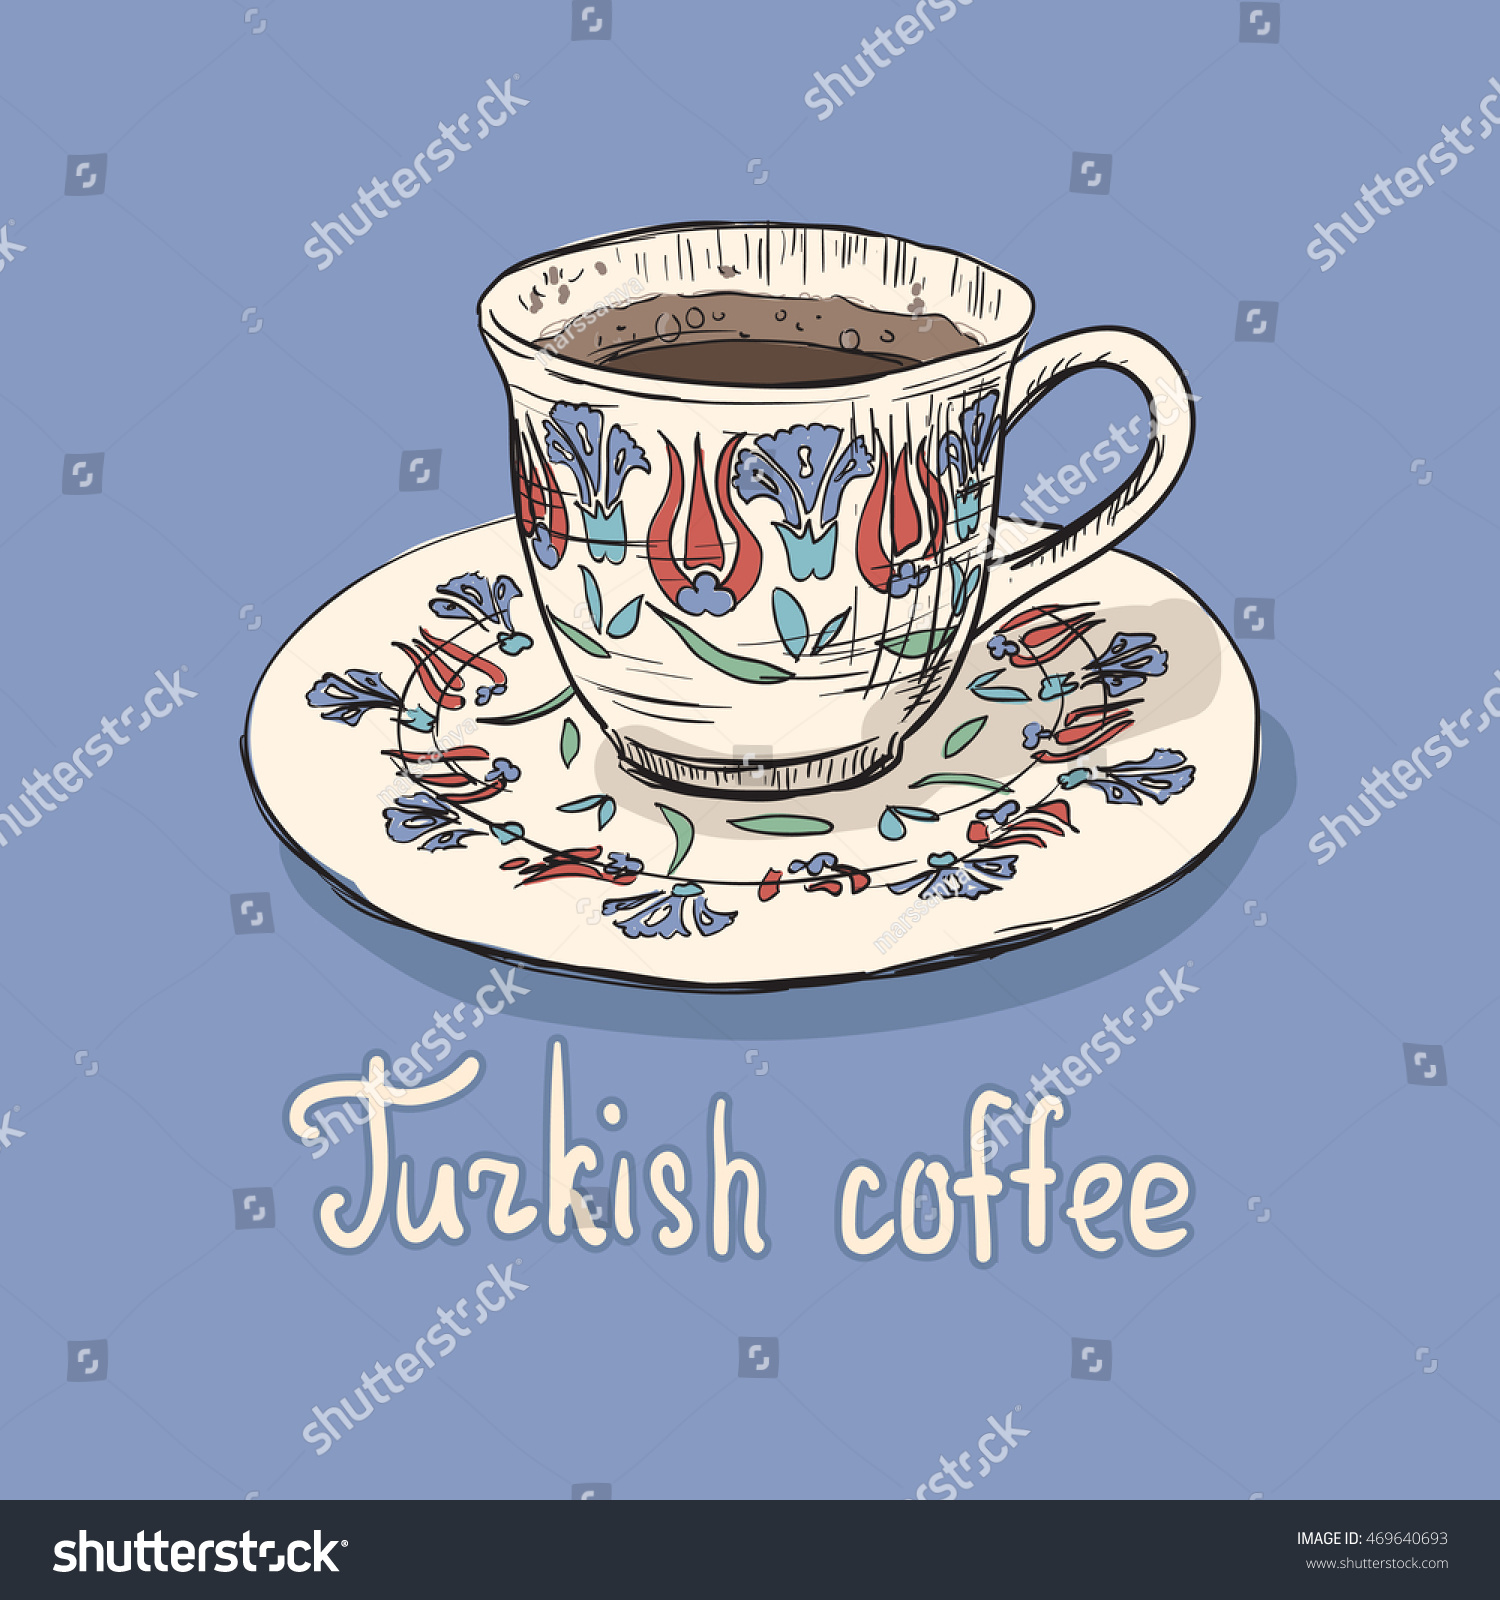 SVG of Hand drawn illustration of cup of coffee. Unique drawing turkish coffee cup with national decorative element and flower patterns. Istanbul coffee time. Turkish culture.  svg